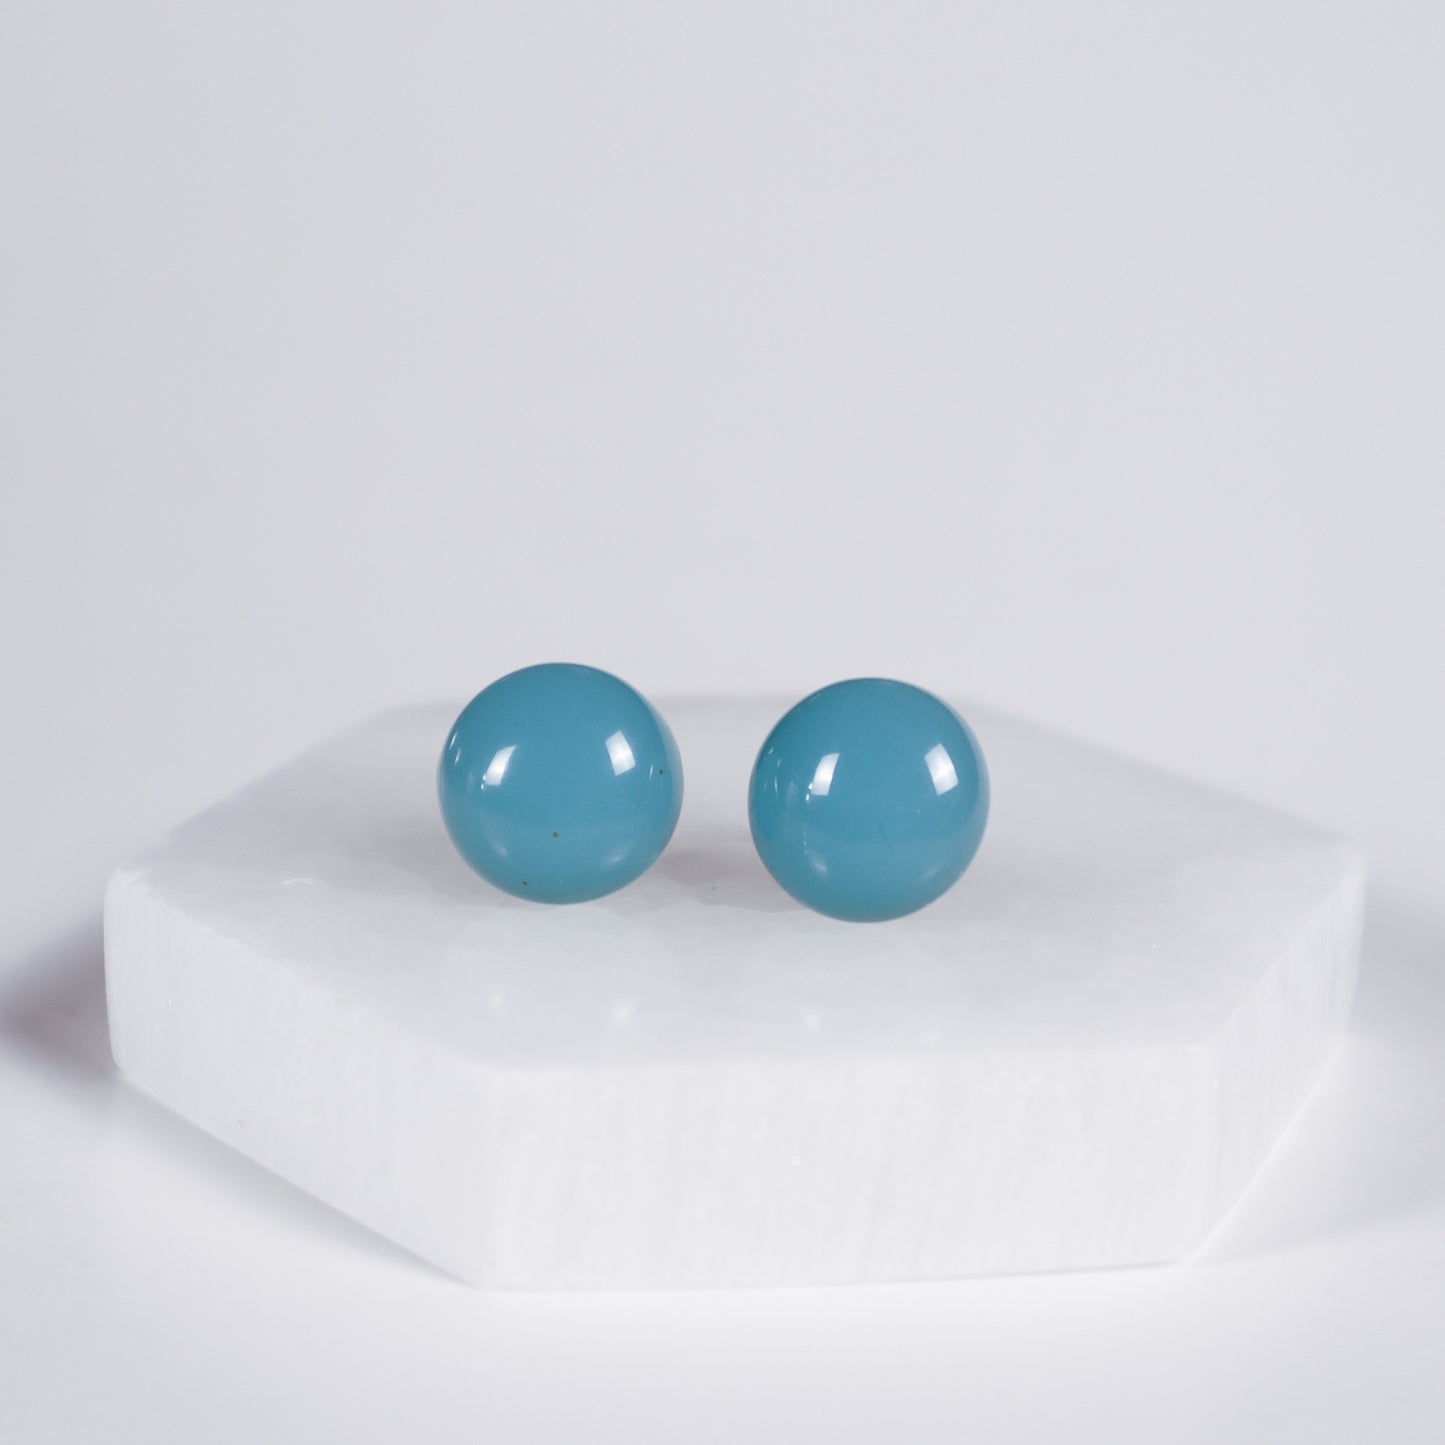 Mini Button Earrings - Turquoise Clear